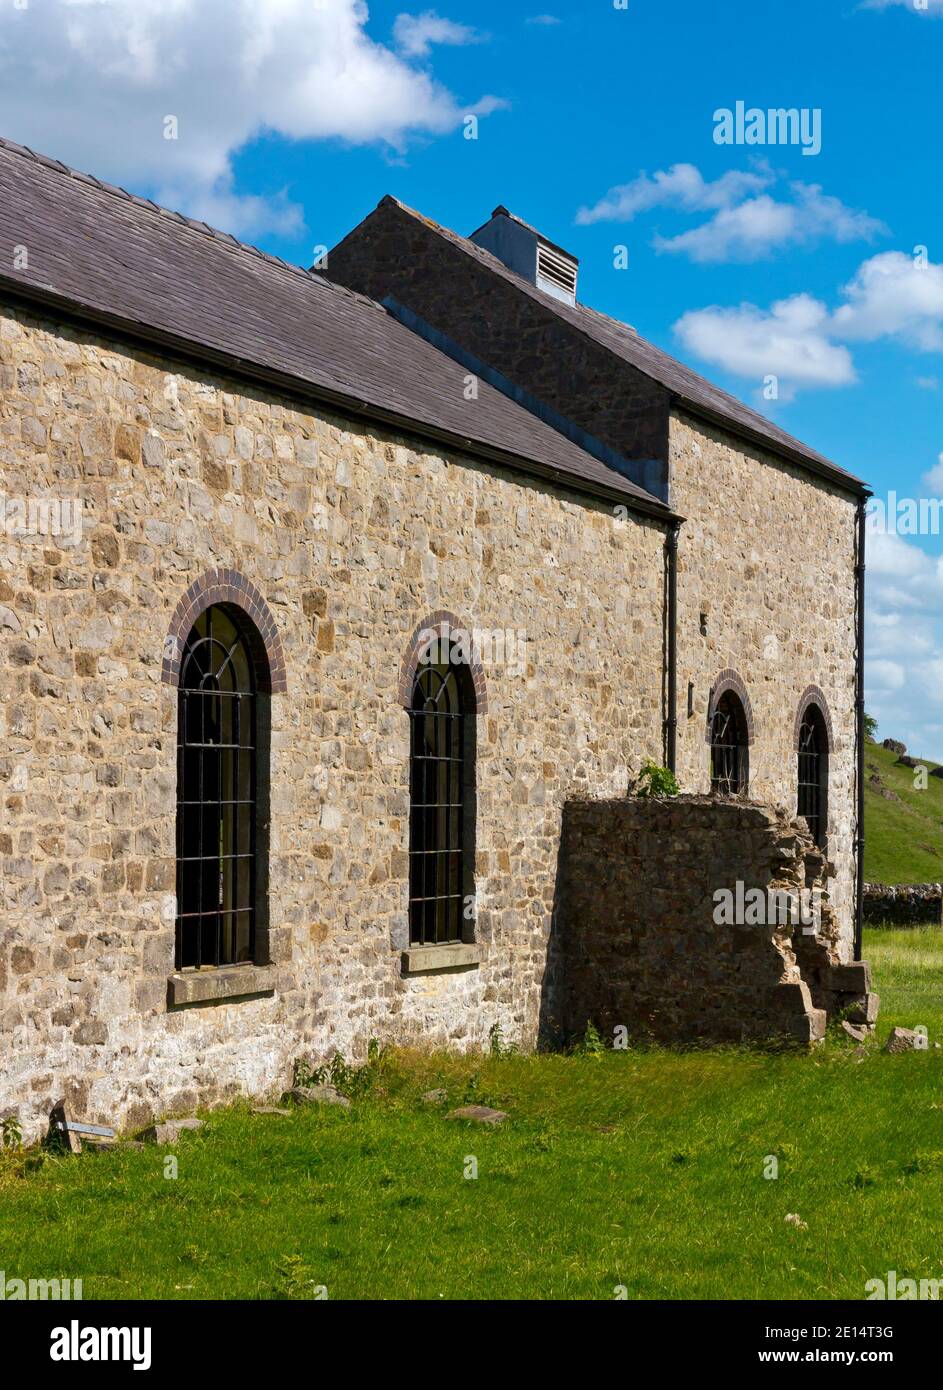 Nineteenth century pump house at Roystone Grange near Pikehall in the Peak District National Park Derbyshire England UK built to power quarry drills. Stock Photo